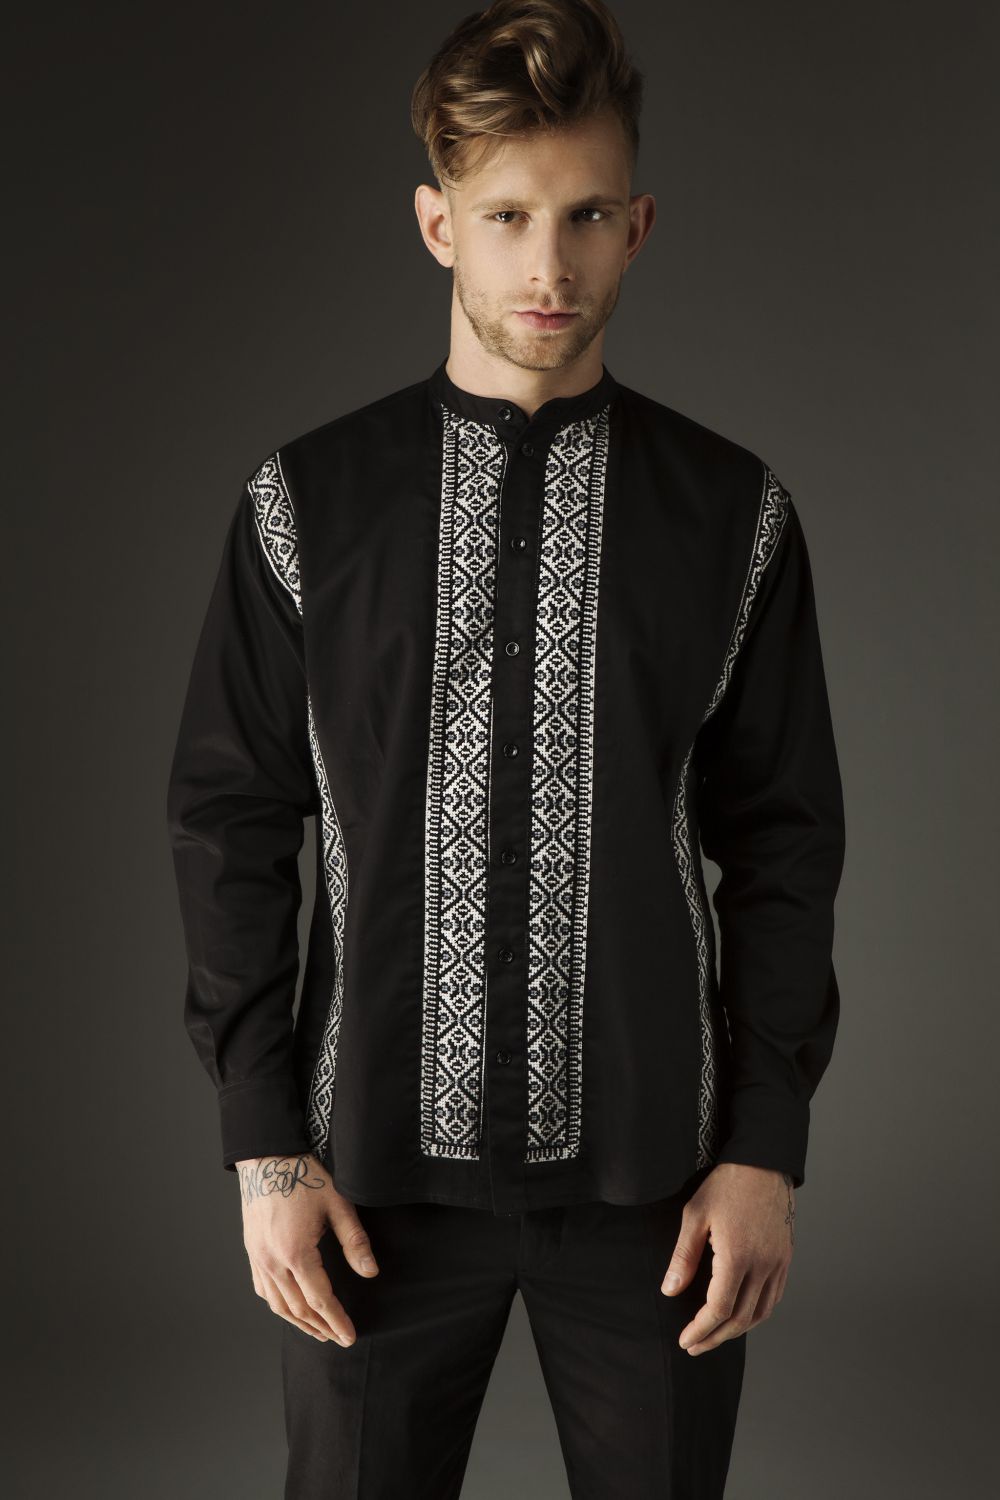 Embroidered Lines of Strong Black shirt